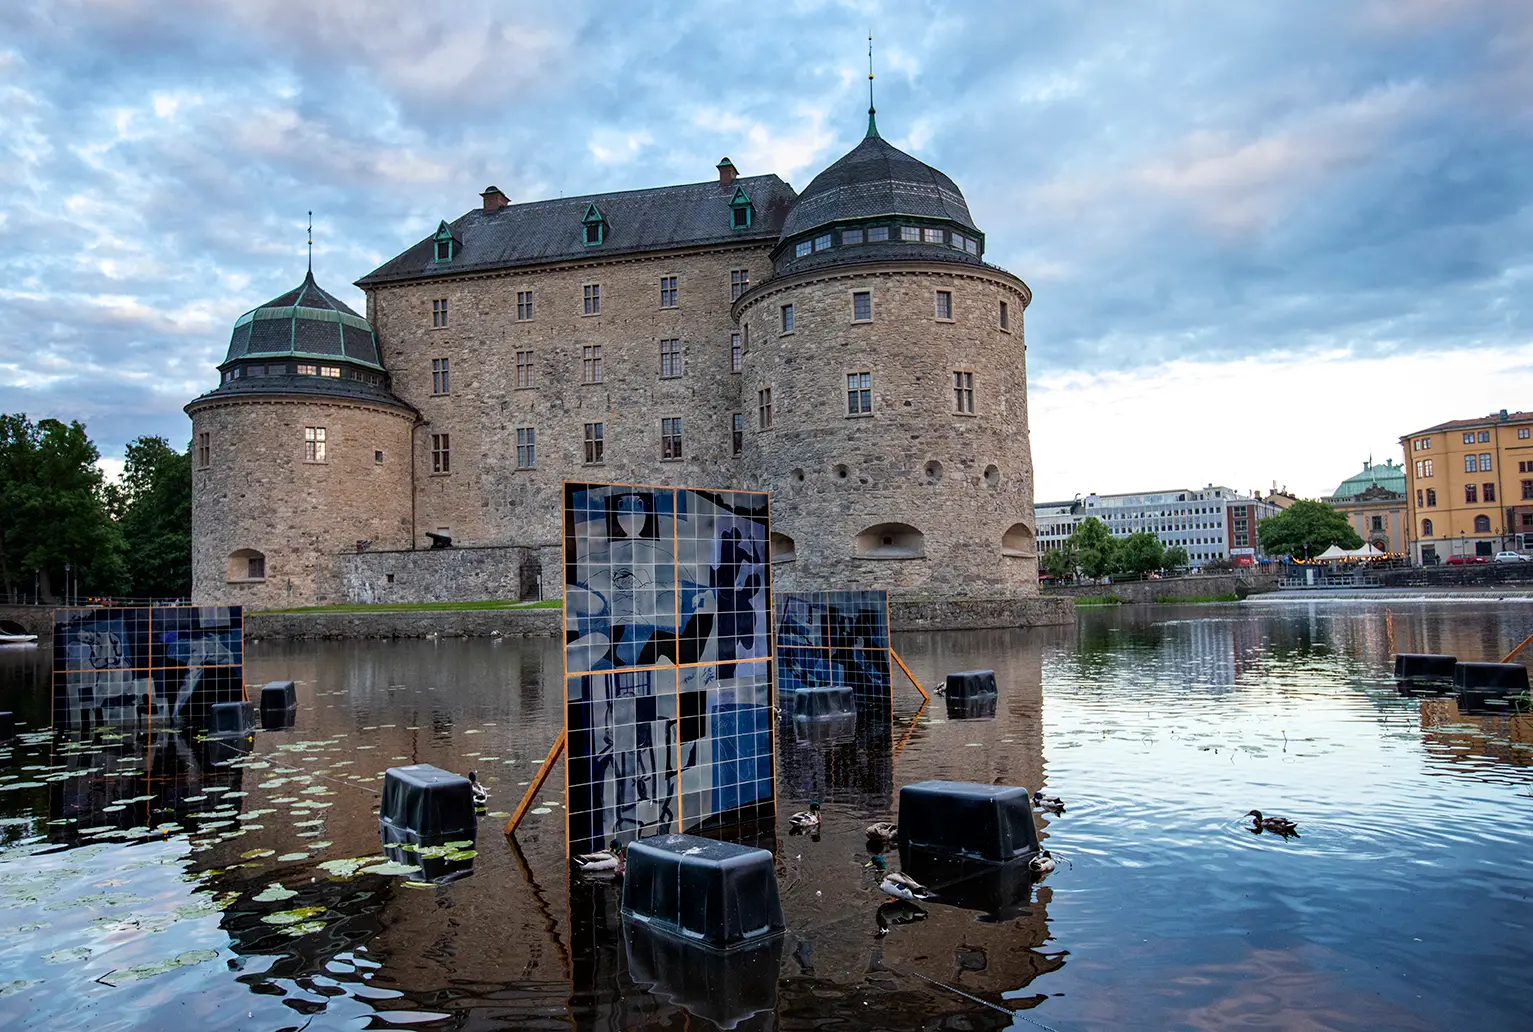 Overview of paintings made of ceramic tiles placed in the water around Örebro Castle. The ceramic tiles are in different shades of blue and on them men's bodies are visible.